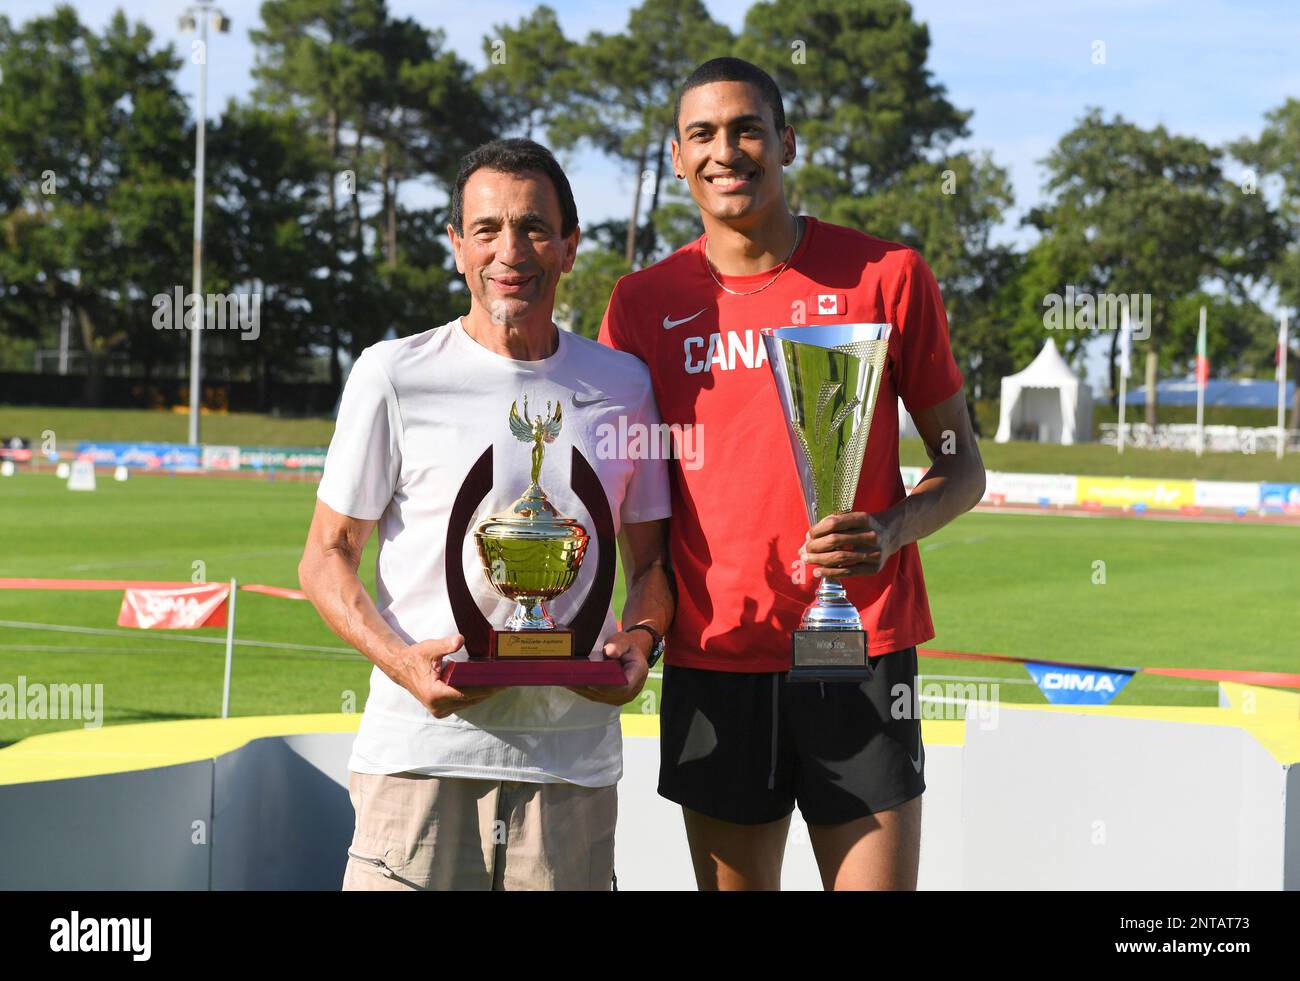 Pierce LePage (CAN), right, poses with trophy and coach Gregory Portnoy  after winning the decathlon with 8,453 points during the decathlon at the  DecaStar meeting, Saturday, June 23, 2019, in Talence, France. (